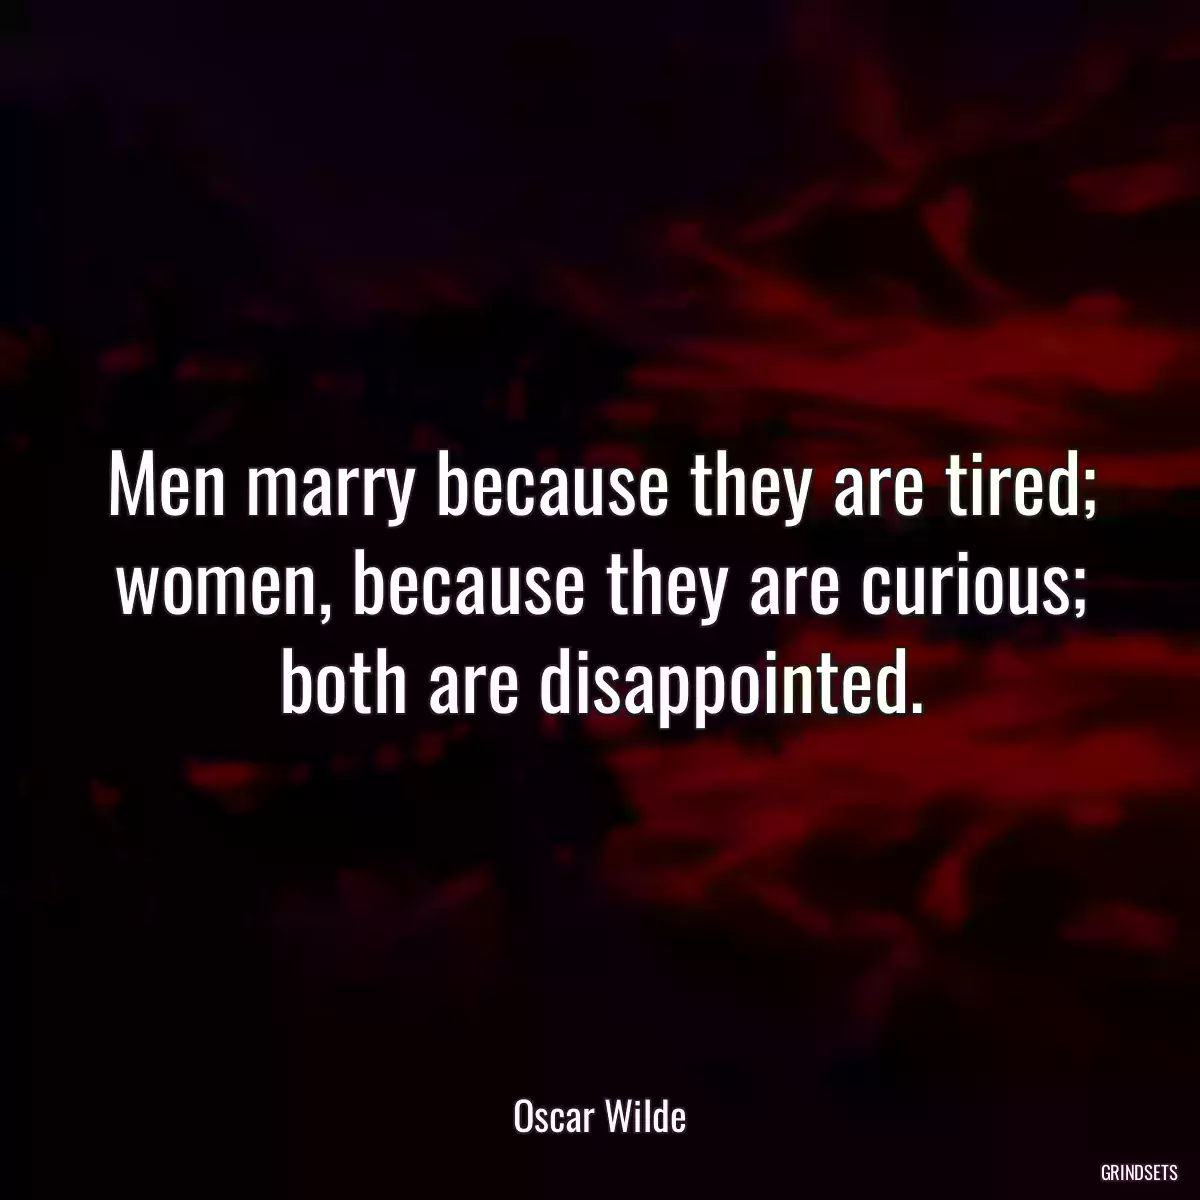 Men marry because they are tired; women, because they are curious; both are disappointed.